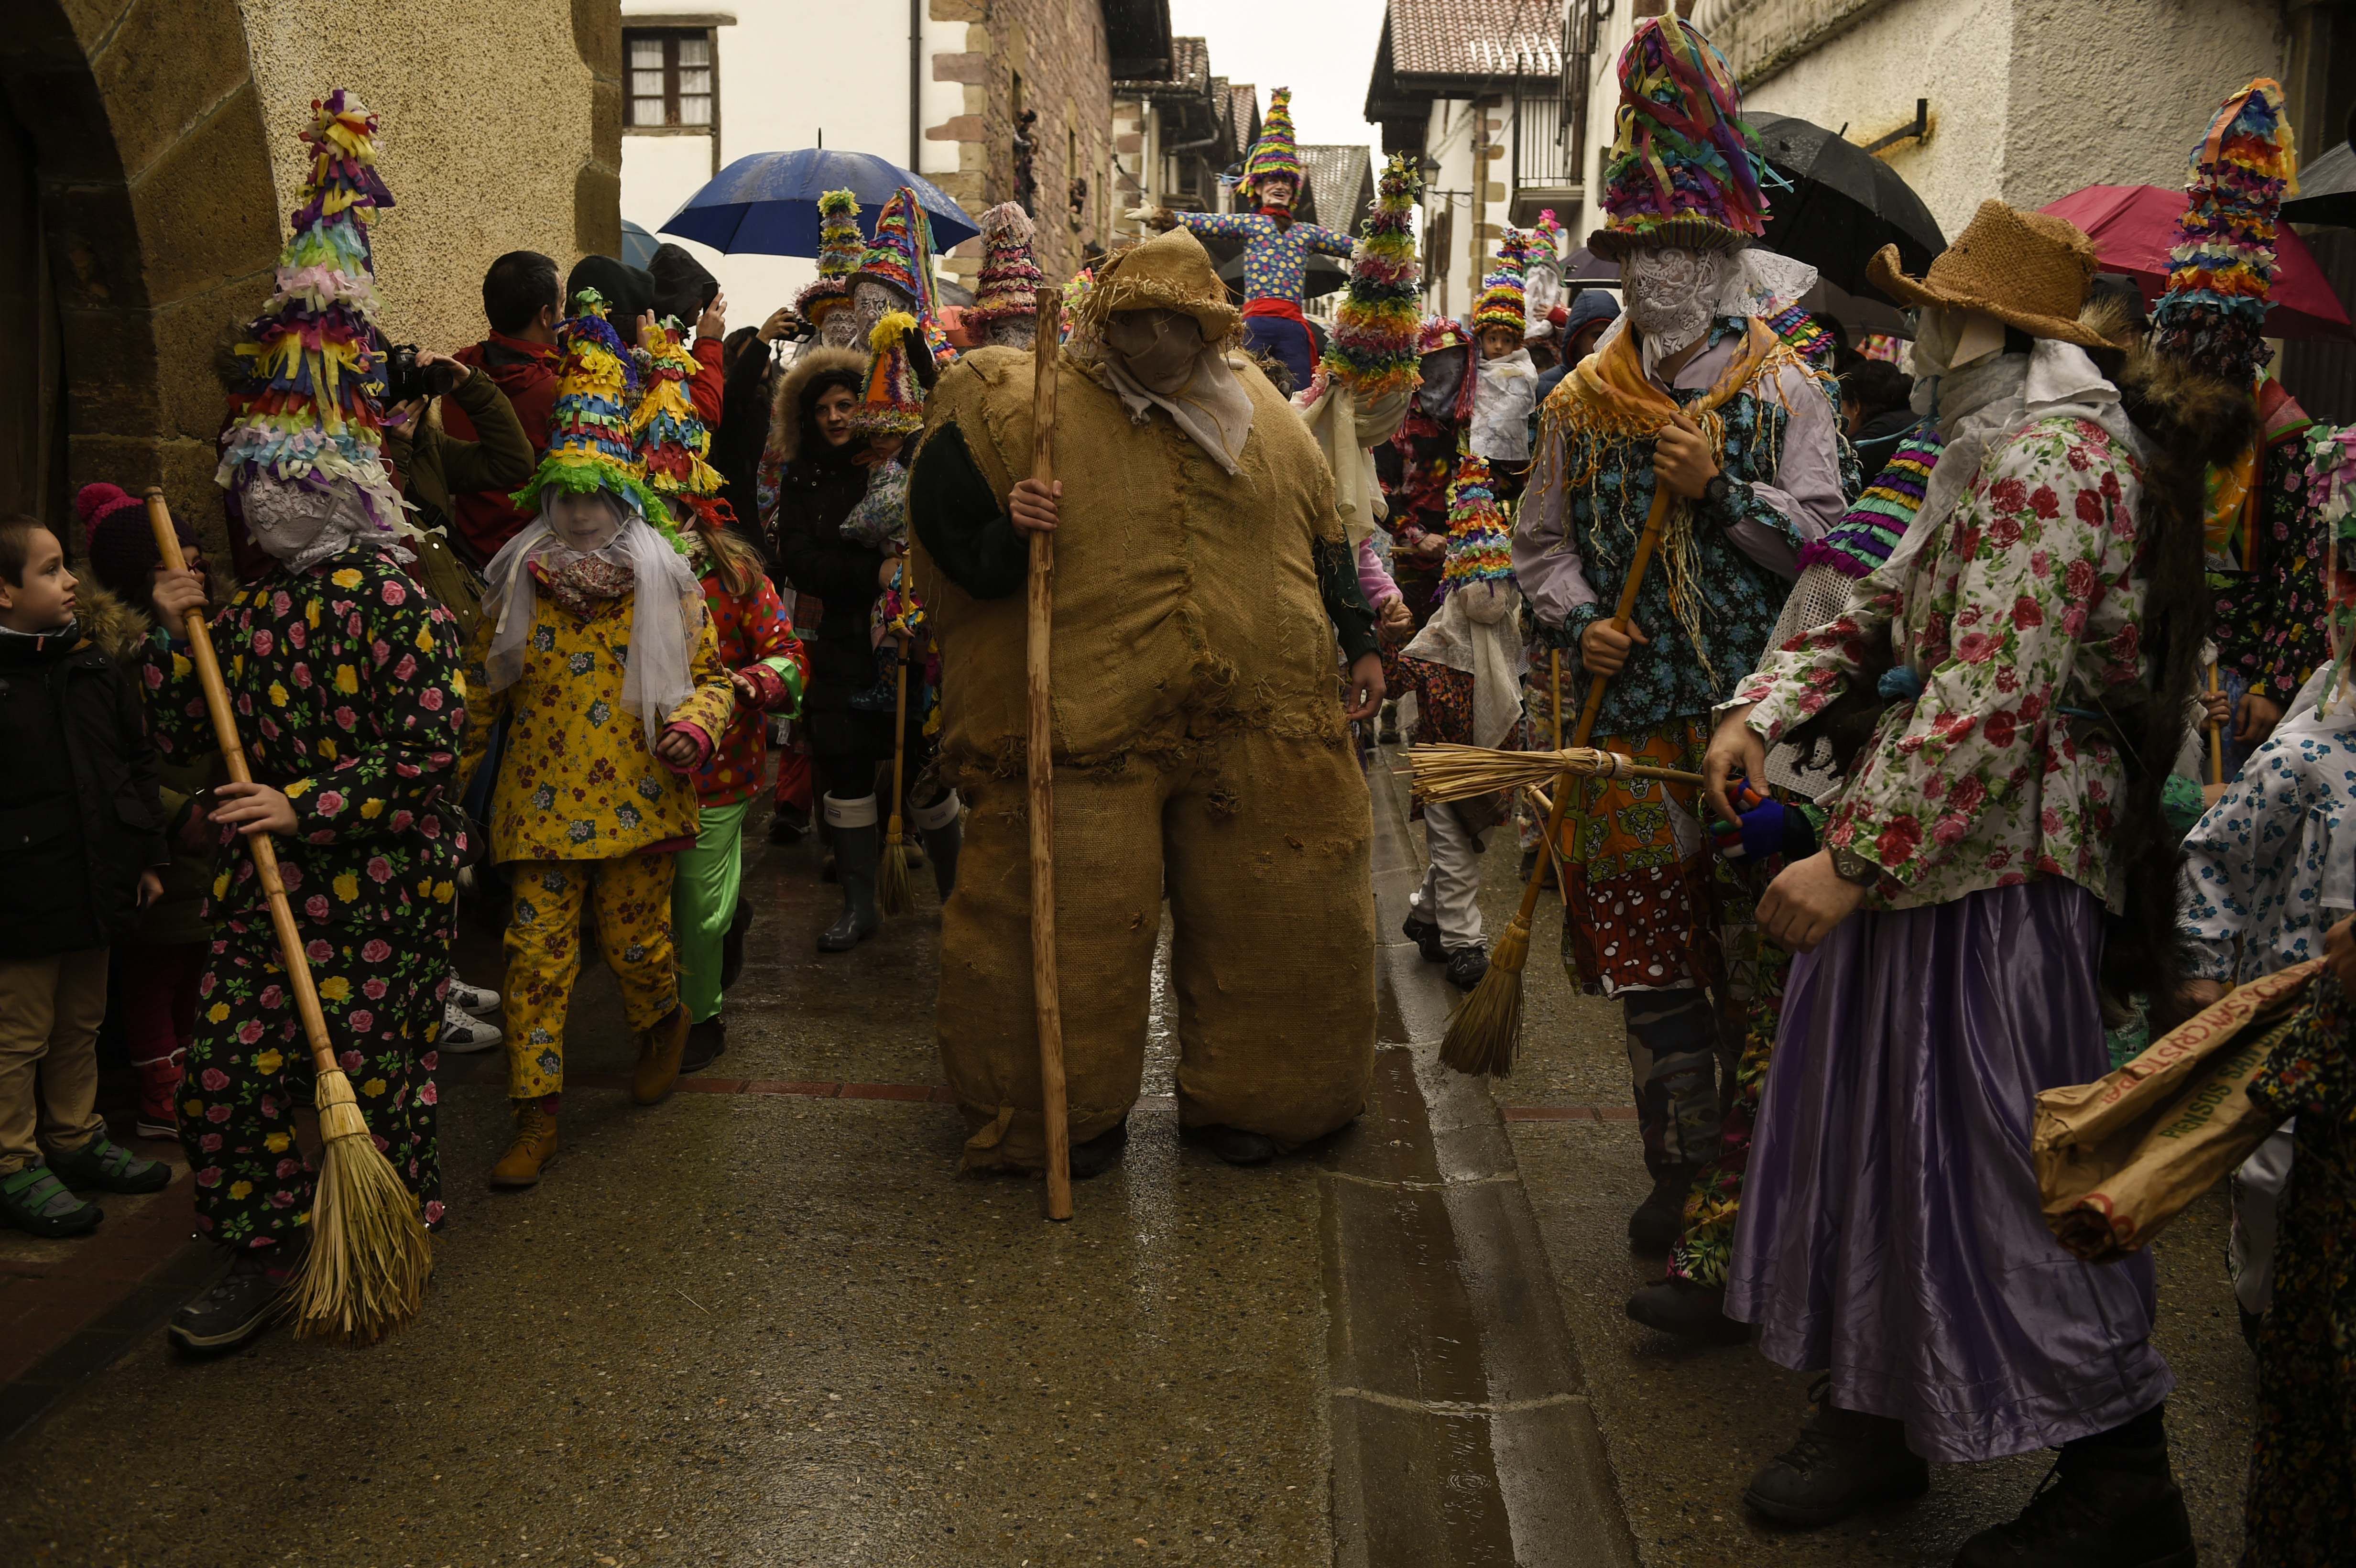 Rural carnival of Lanz is held on February 11, 2018 in Lantz, Spain. The carnival is a great tradition, where the forces of evil and good face-off in a symbolic battle in which the thirst of justice mobilizes the popular ires. Several prominent figures accompany him in the parade: Ziripot, easy-going man and chubby person done based on stuffed sacks of ferns and hay, who scarcely can be kept in foot; the Zaldiko, horse chases fierceness that rushes forth at him up to it throwing at the soil; the Arotzak carry hammers and pliers, and run after the Zaldiko to shoe it, and finally the Txatxos, which sheathed in skins of animals and armed with sticks and brooms, shout while scourge to all the presents. (Photo by Oscar Zubiri / Pacific Press/Sipa USA)(Sipa via AP Images)